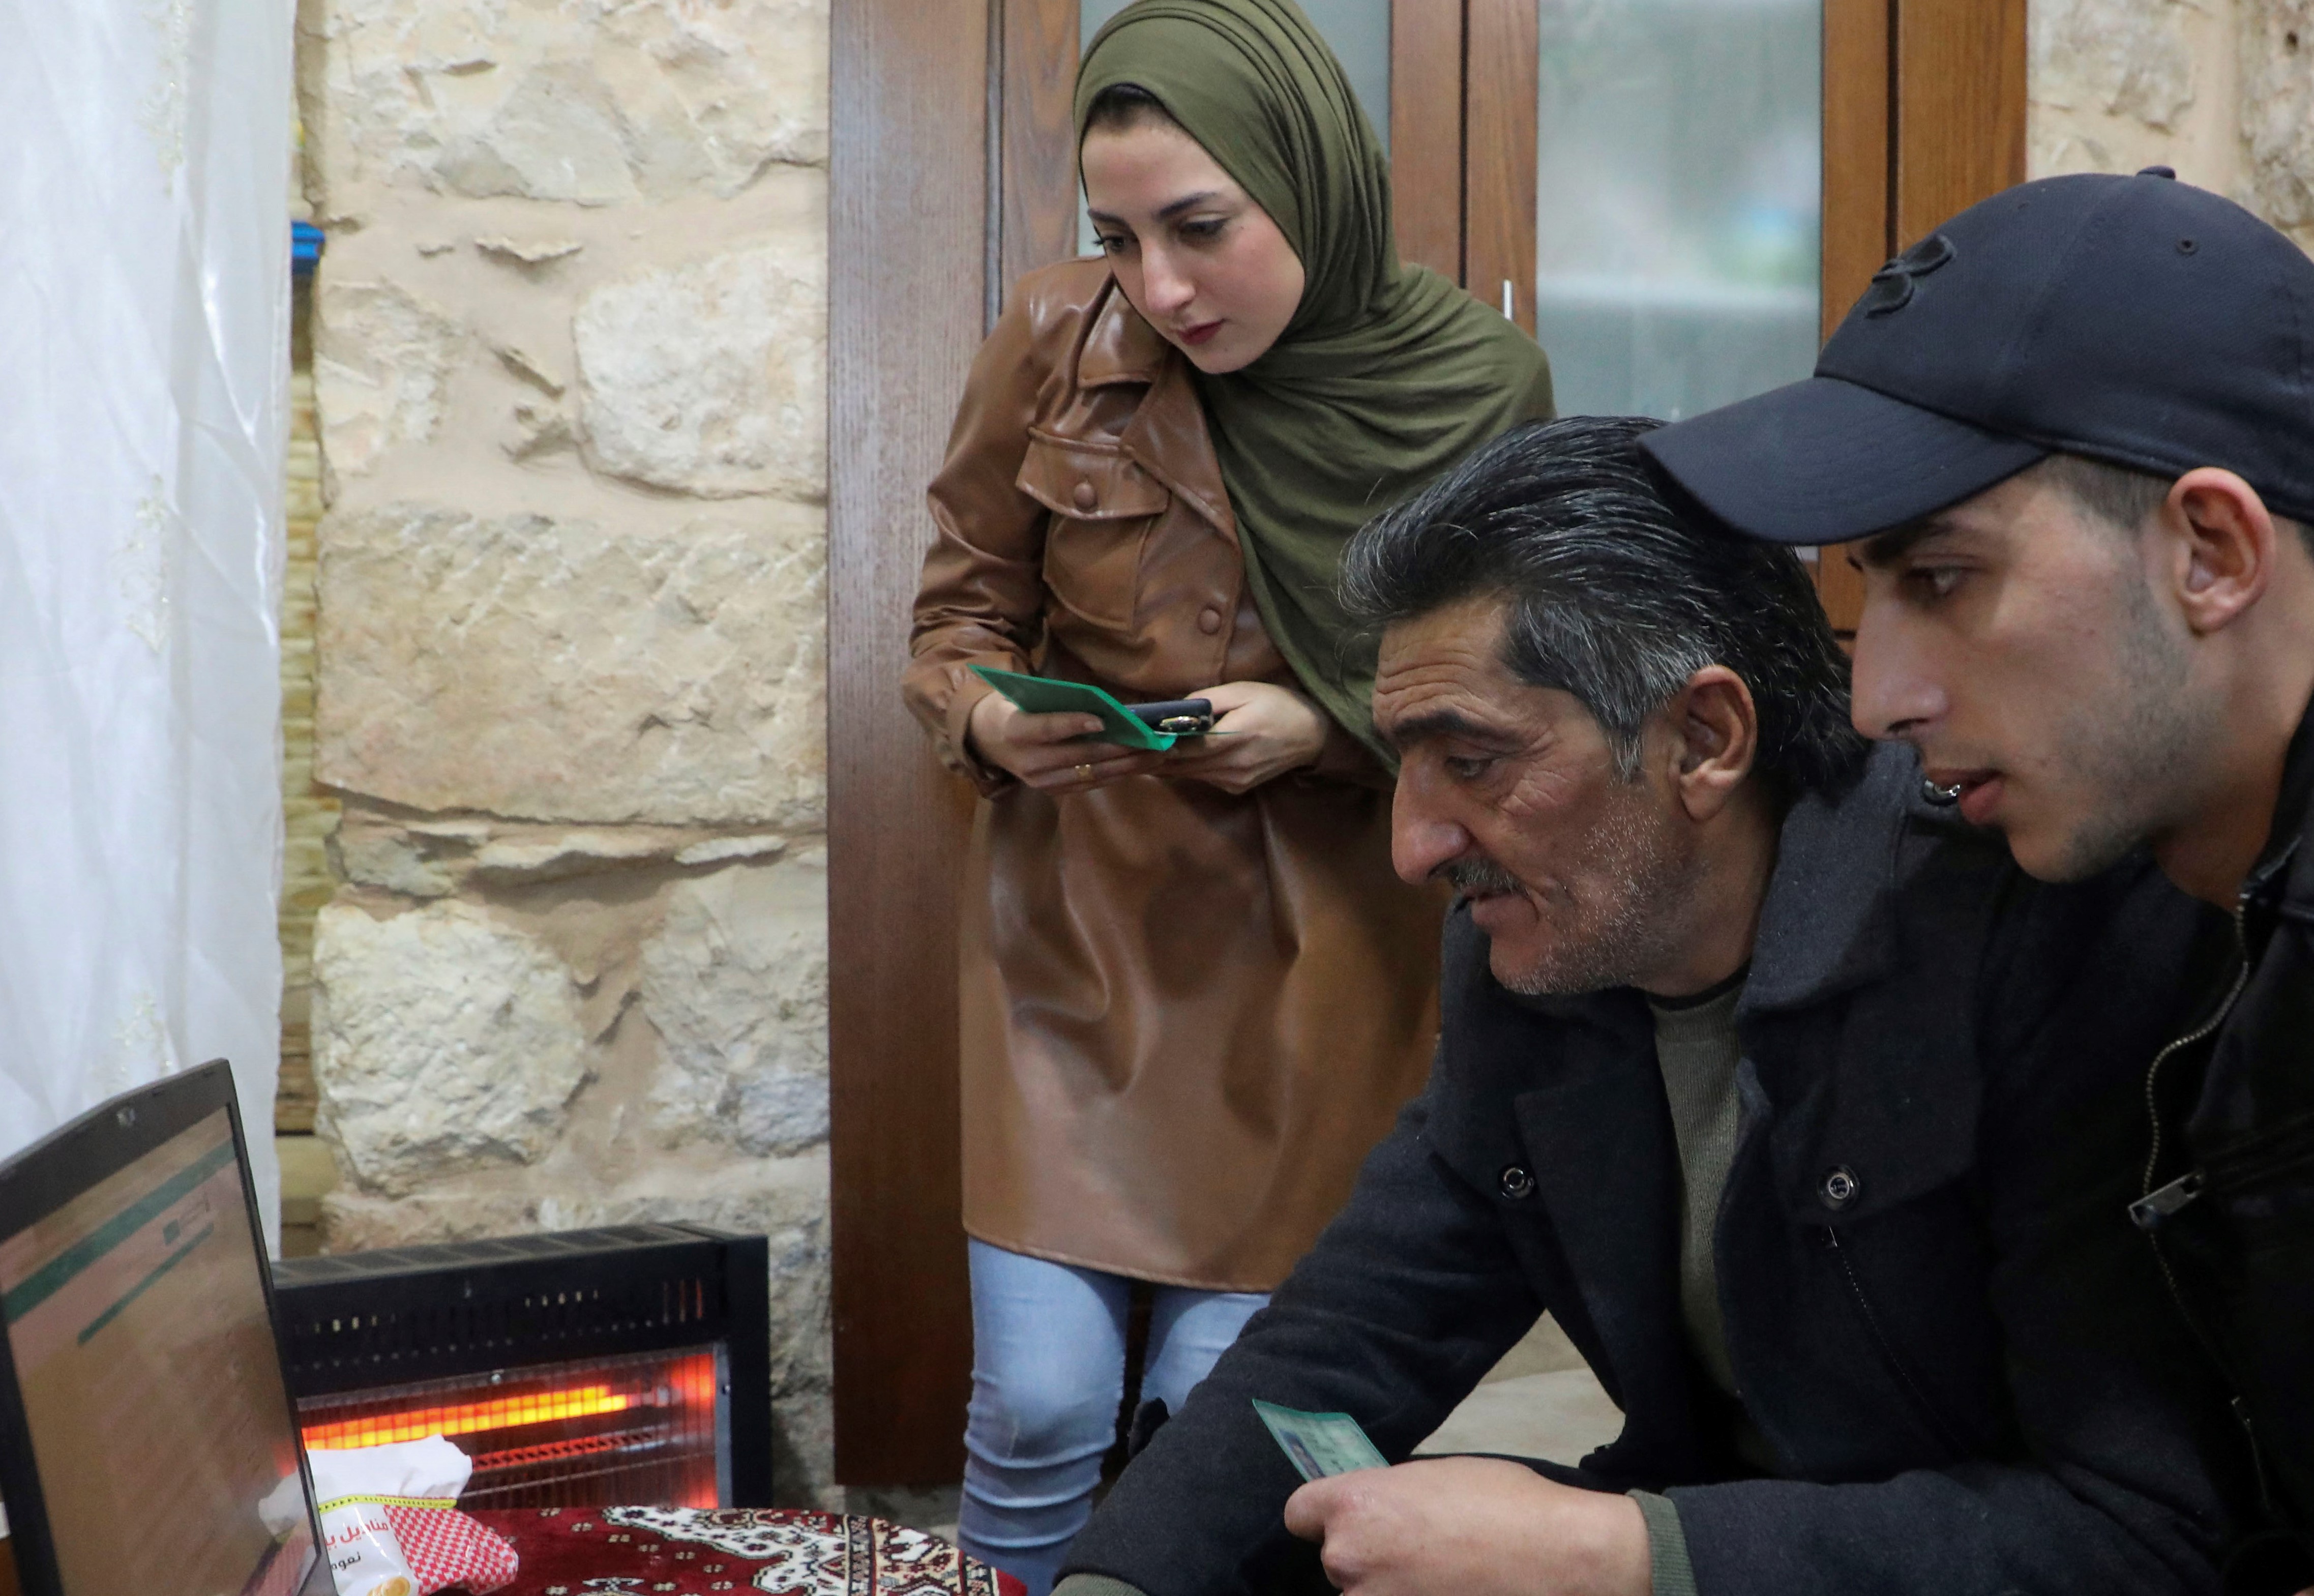 Members of the Palestinian Abu Shamsiyeh family register to vote through the Palestinian Elections Committee website, at home in the West Bank city of Hebron, on January 22, 2021 AFP